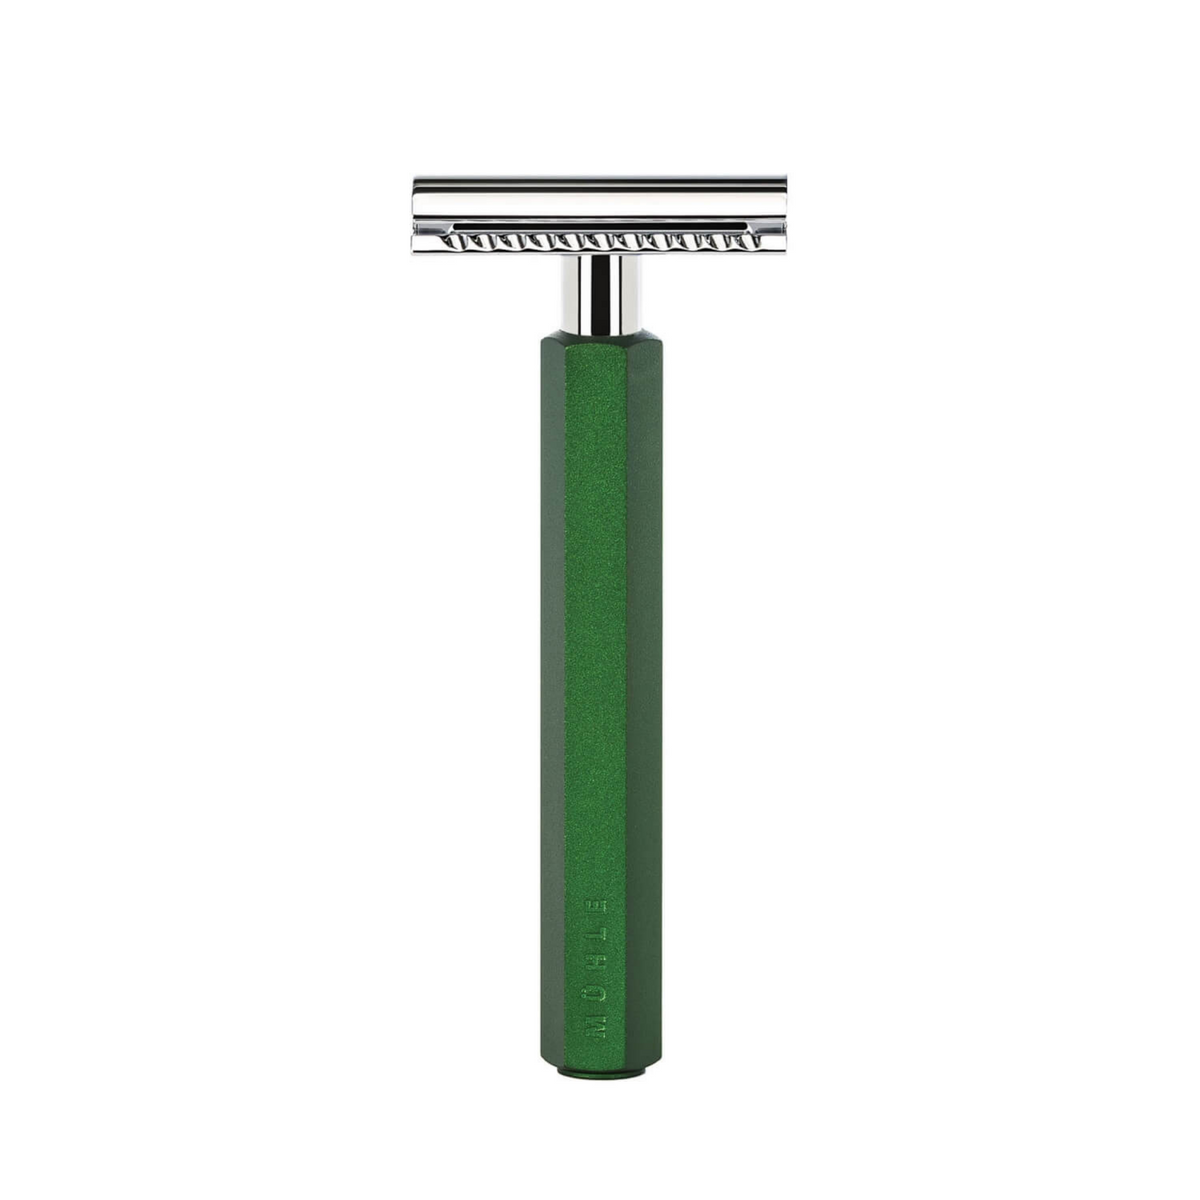 Primary Image of Hexagon Forest Safety Razor